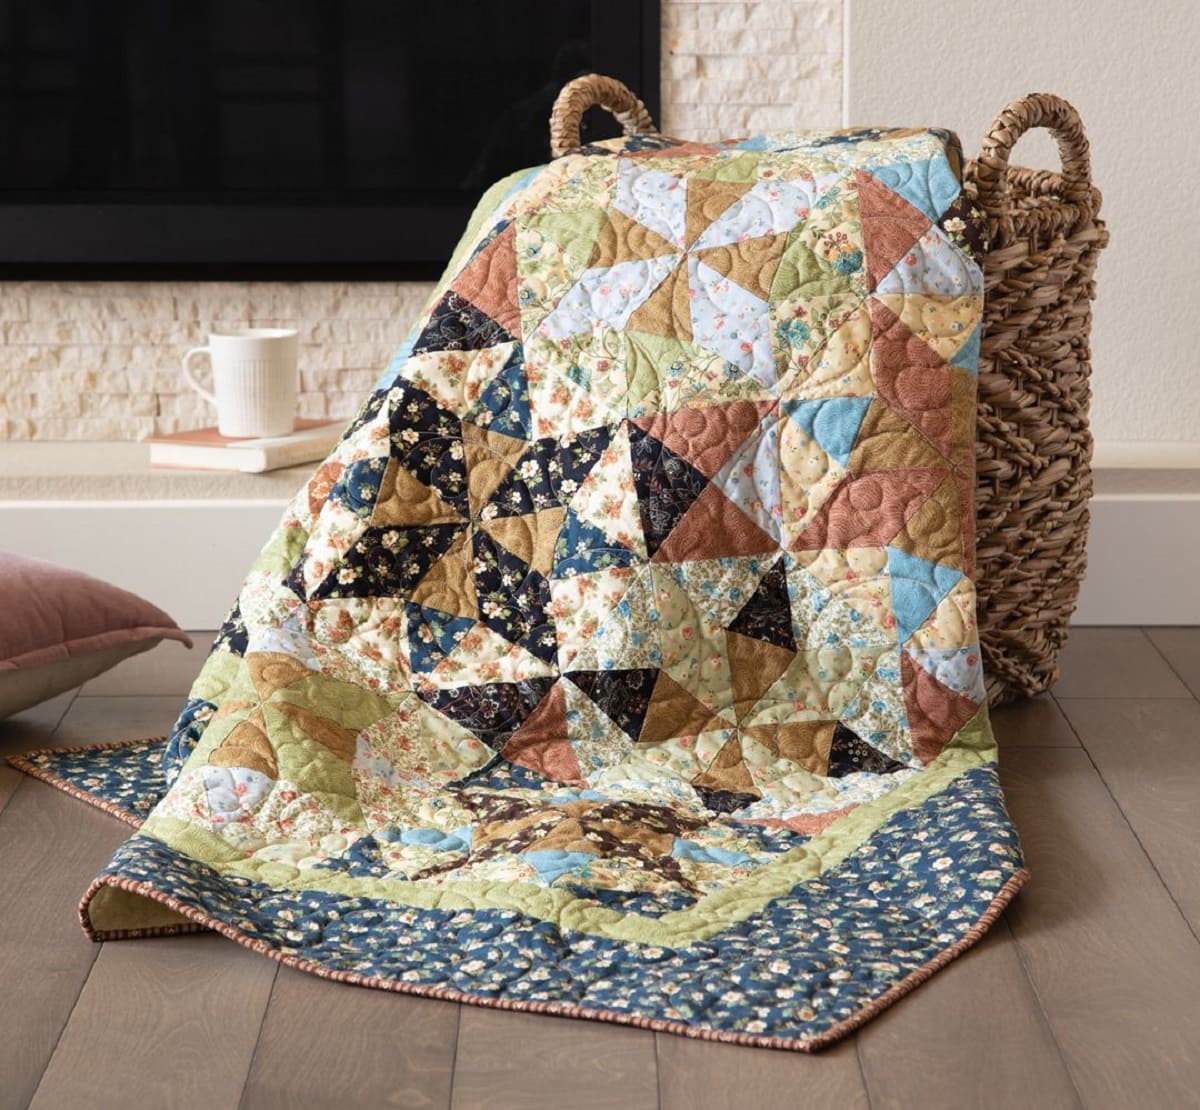 How To Design A Quilt